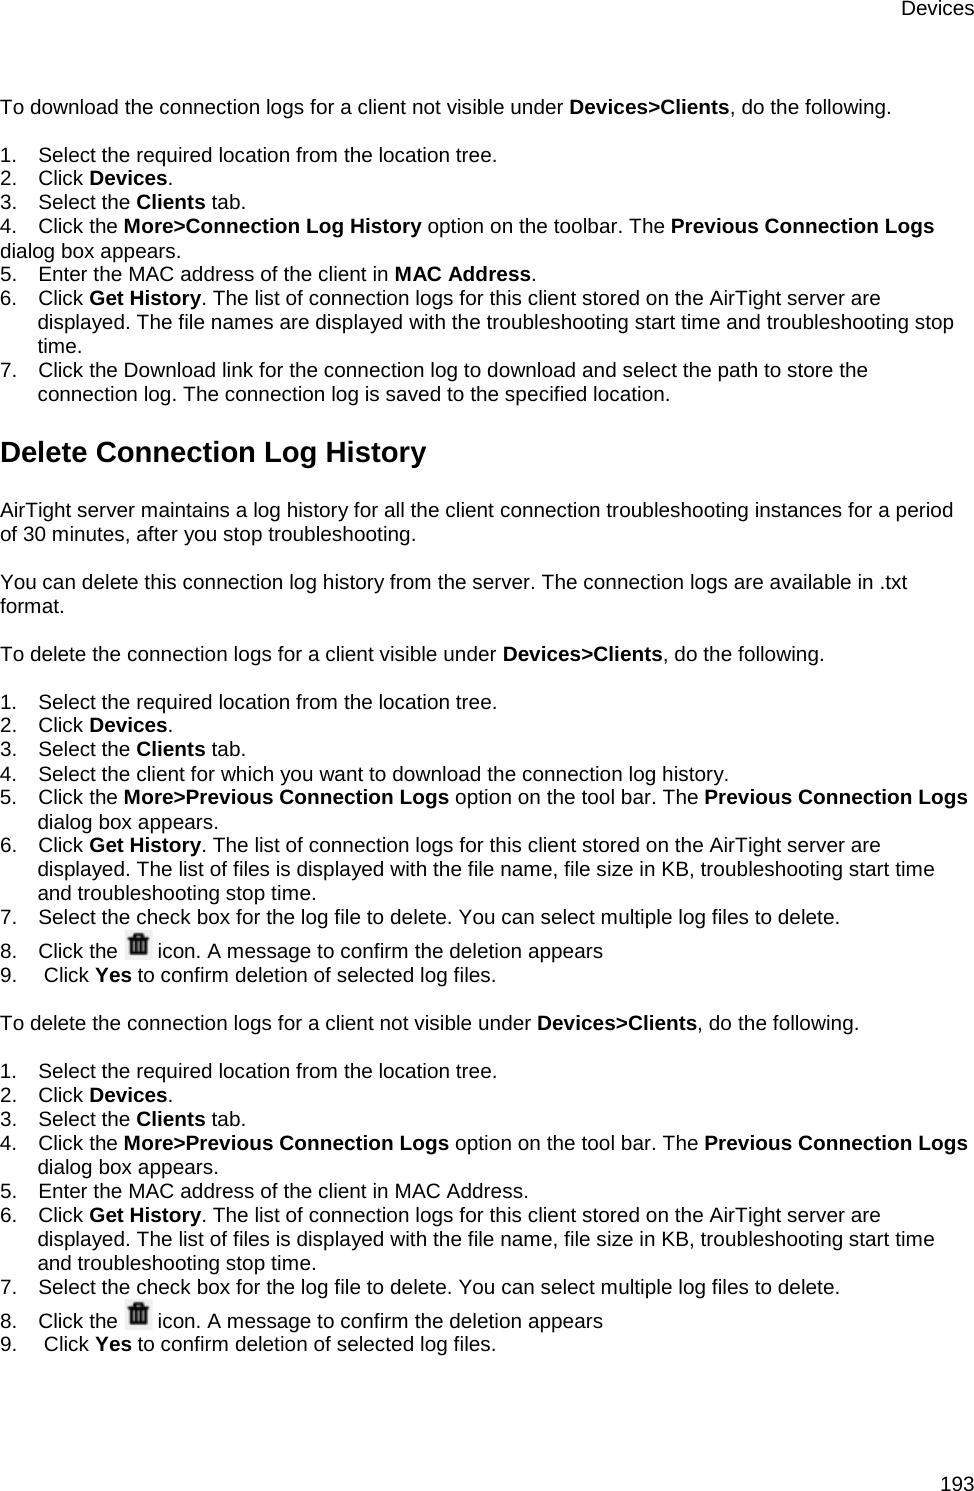 Devices 193   To download the connection logs for a client not visible under Devices&gt;Clients, do the following.   1.      Select the required location from the location tree. 2.      Click Devices. 3.      Select the Clients tab. 4.      Click the More&gt;Connection Log History option on the toolbar. The Previous Connection Logs dialog box appears. 5.      Enter the MAC address of the client in MAC Address. 6.      Click Get History. The list of connection logs for this client stored on the AirTight server are displayed. The file names are displayed with the troubleshooting start time and troubleshooting stop time. 7.      Click the Download link for the connection log to download and select the path to store the connection log. The connection log is saved to the specified location. Delete Connection Log History AirTight server maintains a log history for all the client connection troubleshooting instances for a period of 30 minutes, after you stop troubleshooting.   You can delete this connection log history from the server. The connection logs are available in .txt format.   To delete the connection logs for a client visible under Devices&gt;Clients, do the following.   1.      Select the required location from the location tree. 2.      Click Devices. 3.      Select the Clients tab. 4.      Select the client for which you want to download the connection log history. 5.      Click the More&gt;Previous Connection Logs option on the tool bar. The Previous Connection Logs dialog box appears. 6.      Click Get History. The list of connection logs for this client stored on the AirTight server are displayed. The list of files is displayed with the file name, file size in KB, troubleshooting start time and troubleshooting stop time. 7.      Select the check box for the log file to delete. You can select multiple log files to delete. 8.      Click the   icon. A message to confirm the deletion appears 9.       Click Yes to confirm deletion of selected log files.   To delete the connection logs for a client not visible under Devices&gt;Clients, do the following.   1.      Select the required location from the location tree. 2.      Click Devices. 3.      Select the Clients tab. 4.      Click the More&gt;Previous Connection Logs option on the tool bar. The Previous Connection Logs dialog box appears. 5.      Enter the MAC address of the client in MAC Address. 6.      Click Get History. The list of connection logs for this client stored on the AirTight server are displayed. The list of files is displayed with the file name, file size in KB, troubleshooting start time and troubleshooting stop time. 7.      Select the check box for the log file to delete. You can select multiple log files to delete. 8.      Click the   icon. A message to confirm the deletion appears 9.       Click Yes to confirm deletion of selected log files.   